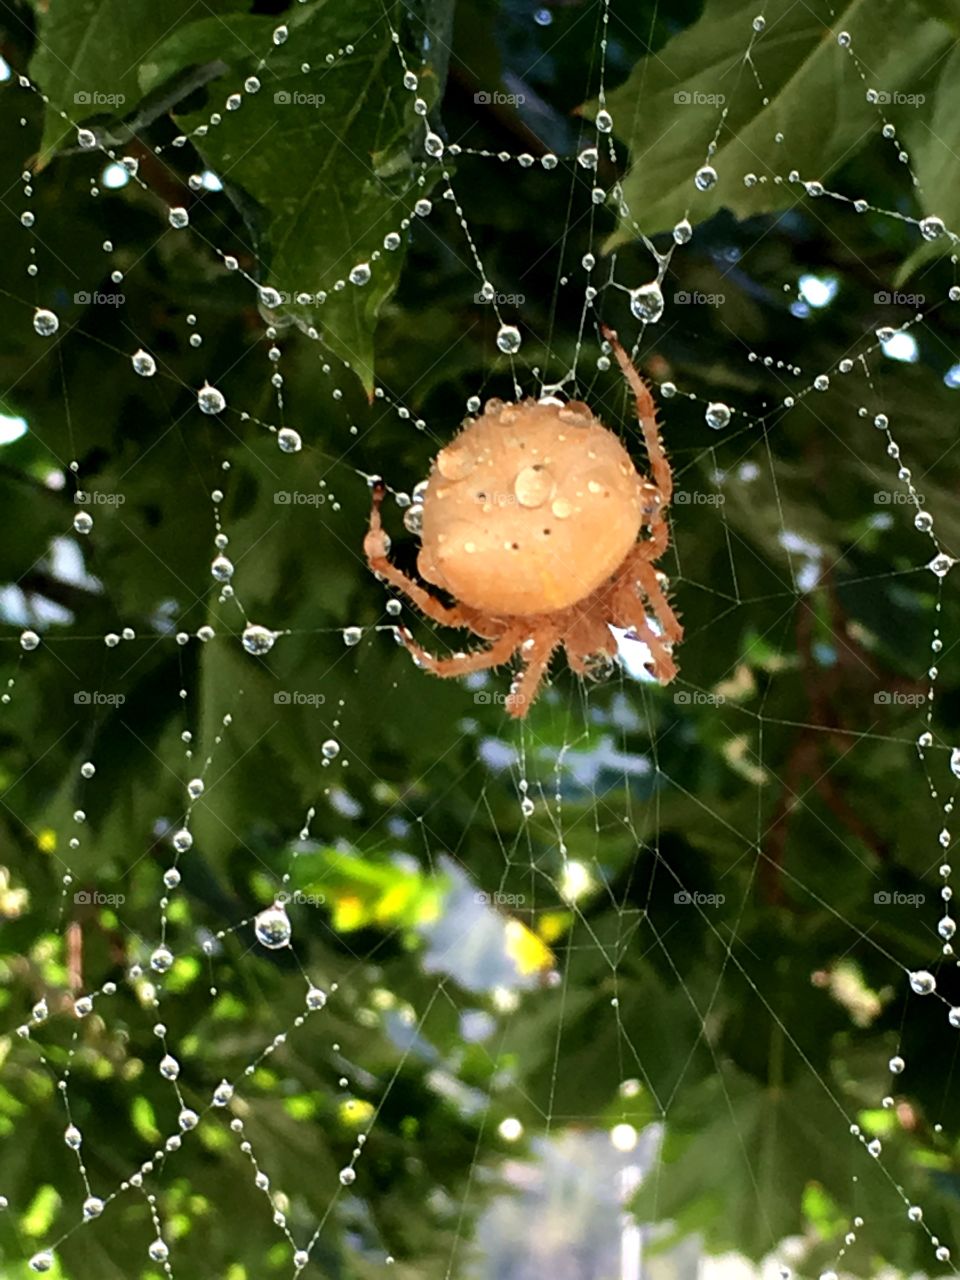 A large beige colored spider in the middle of her web with water droplets on a sunny day